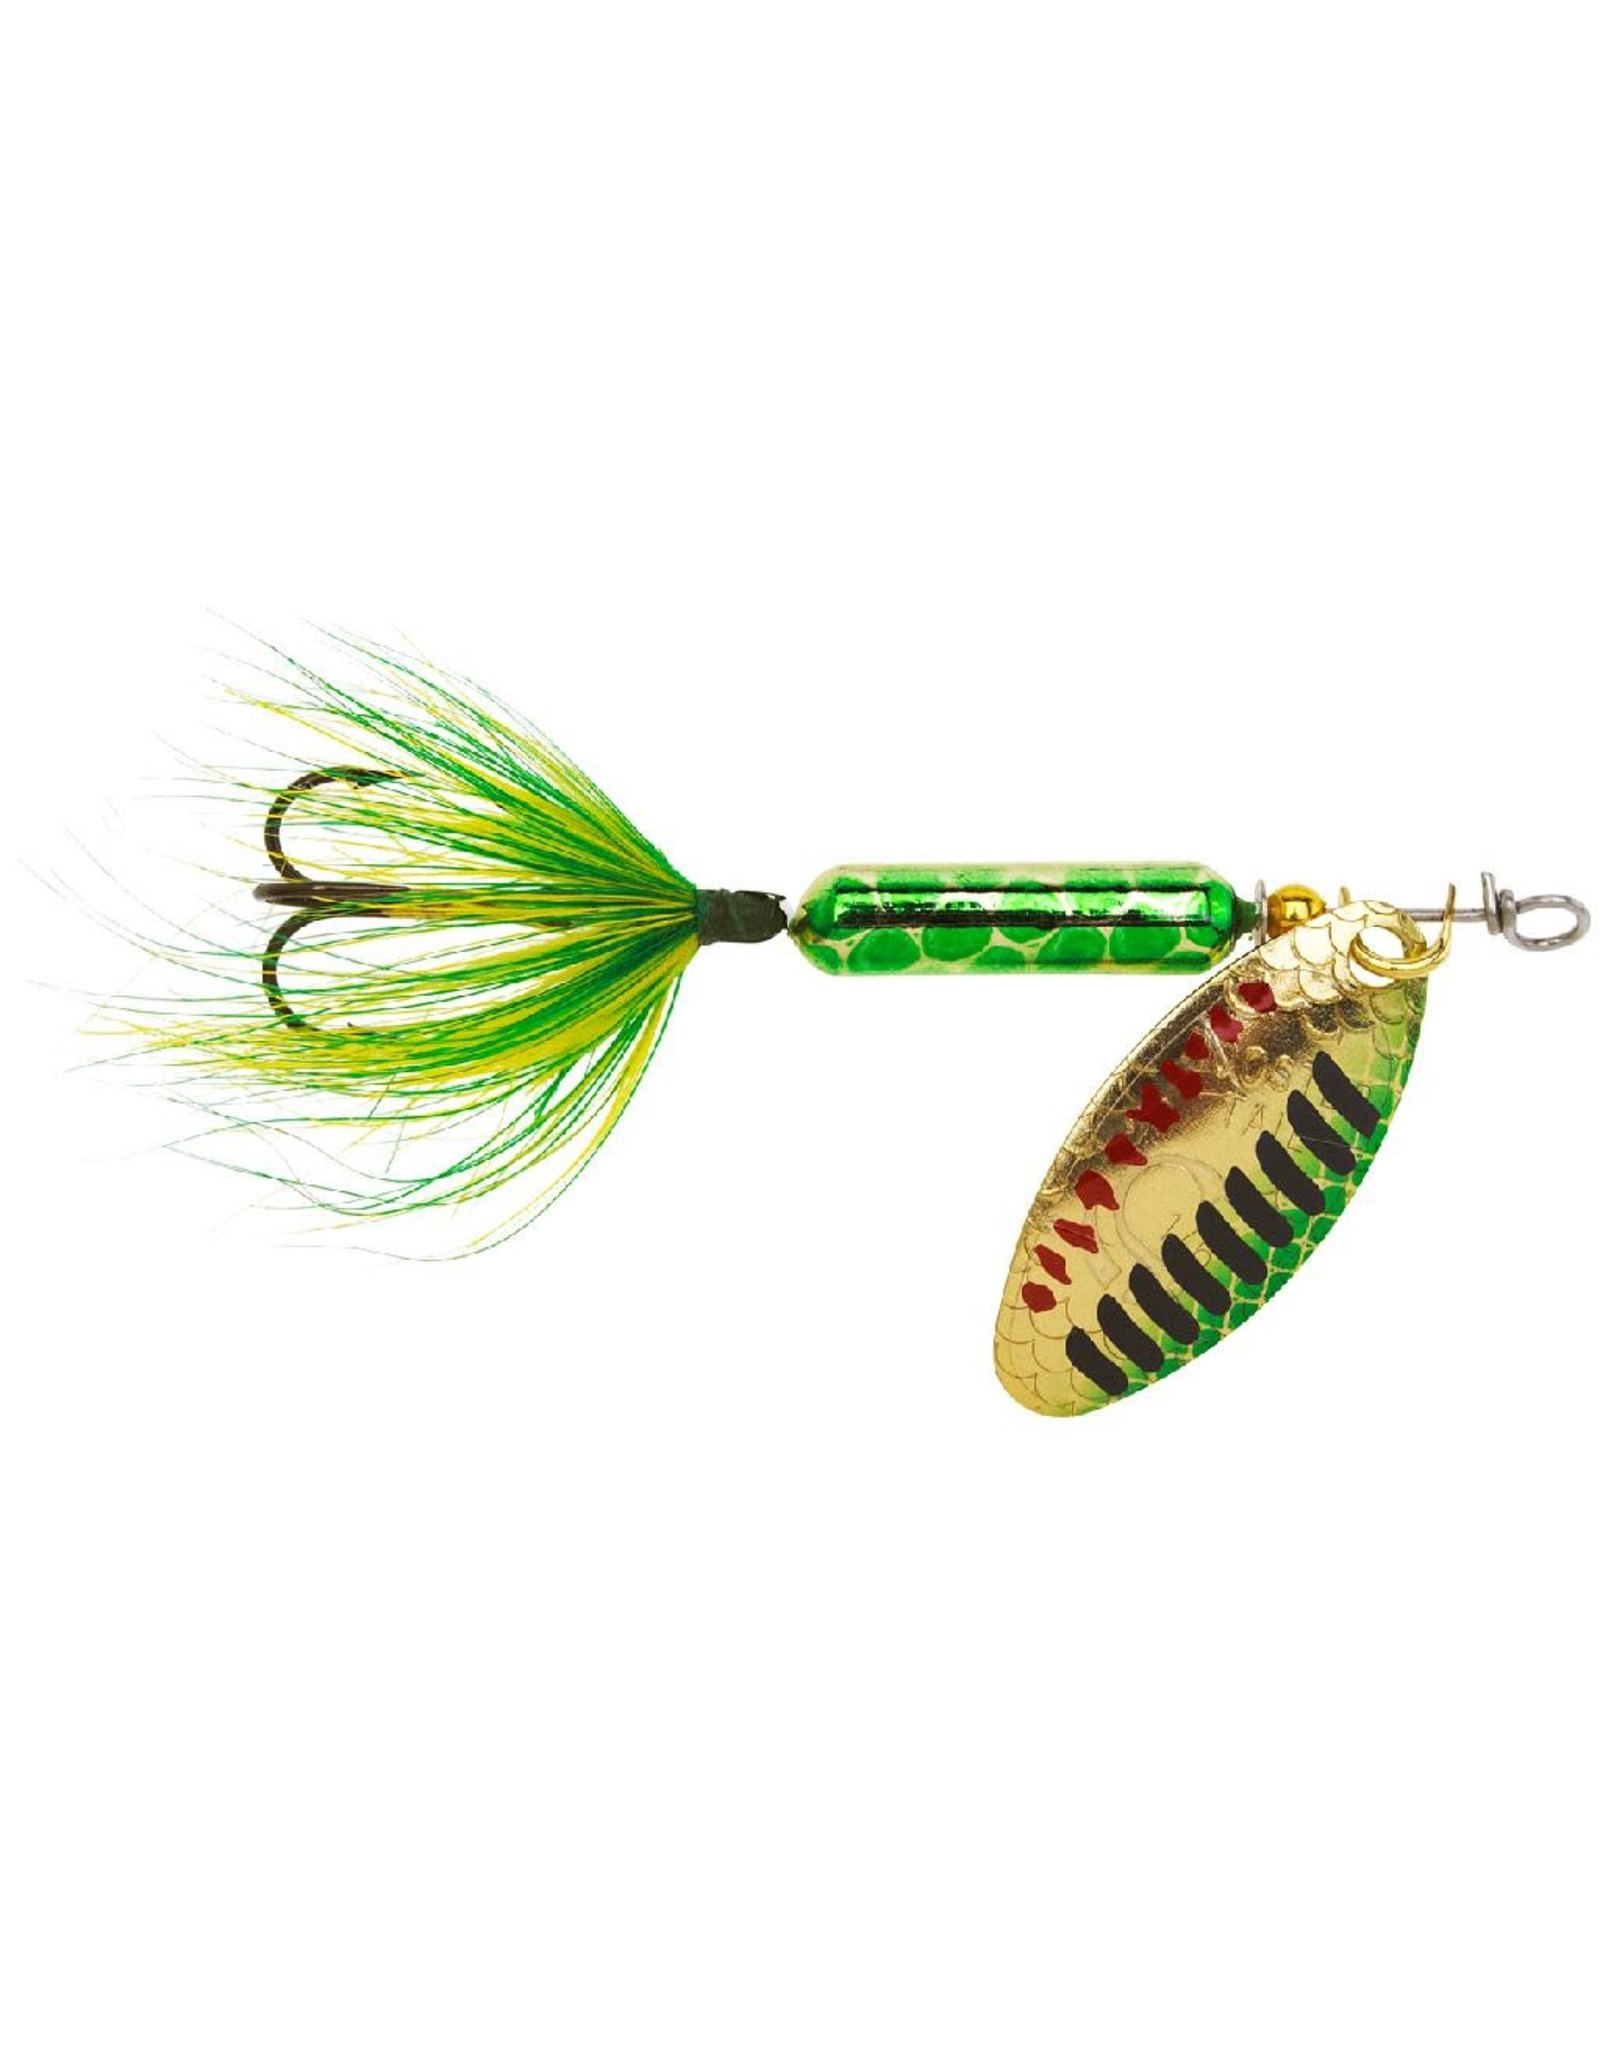 Worden's Rooster Tail 1/8 Oz. 208 - Metallic Gold and Green Pirate